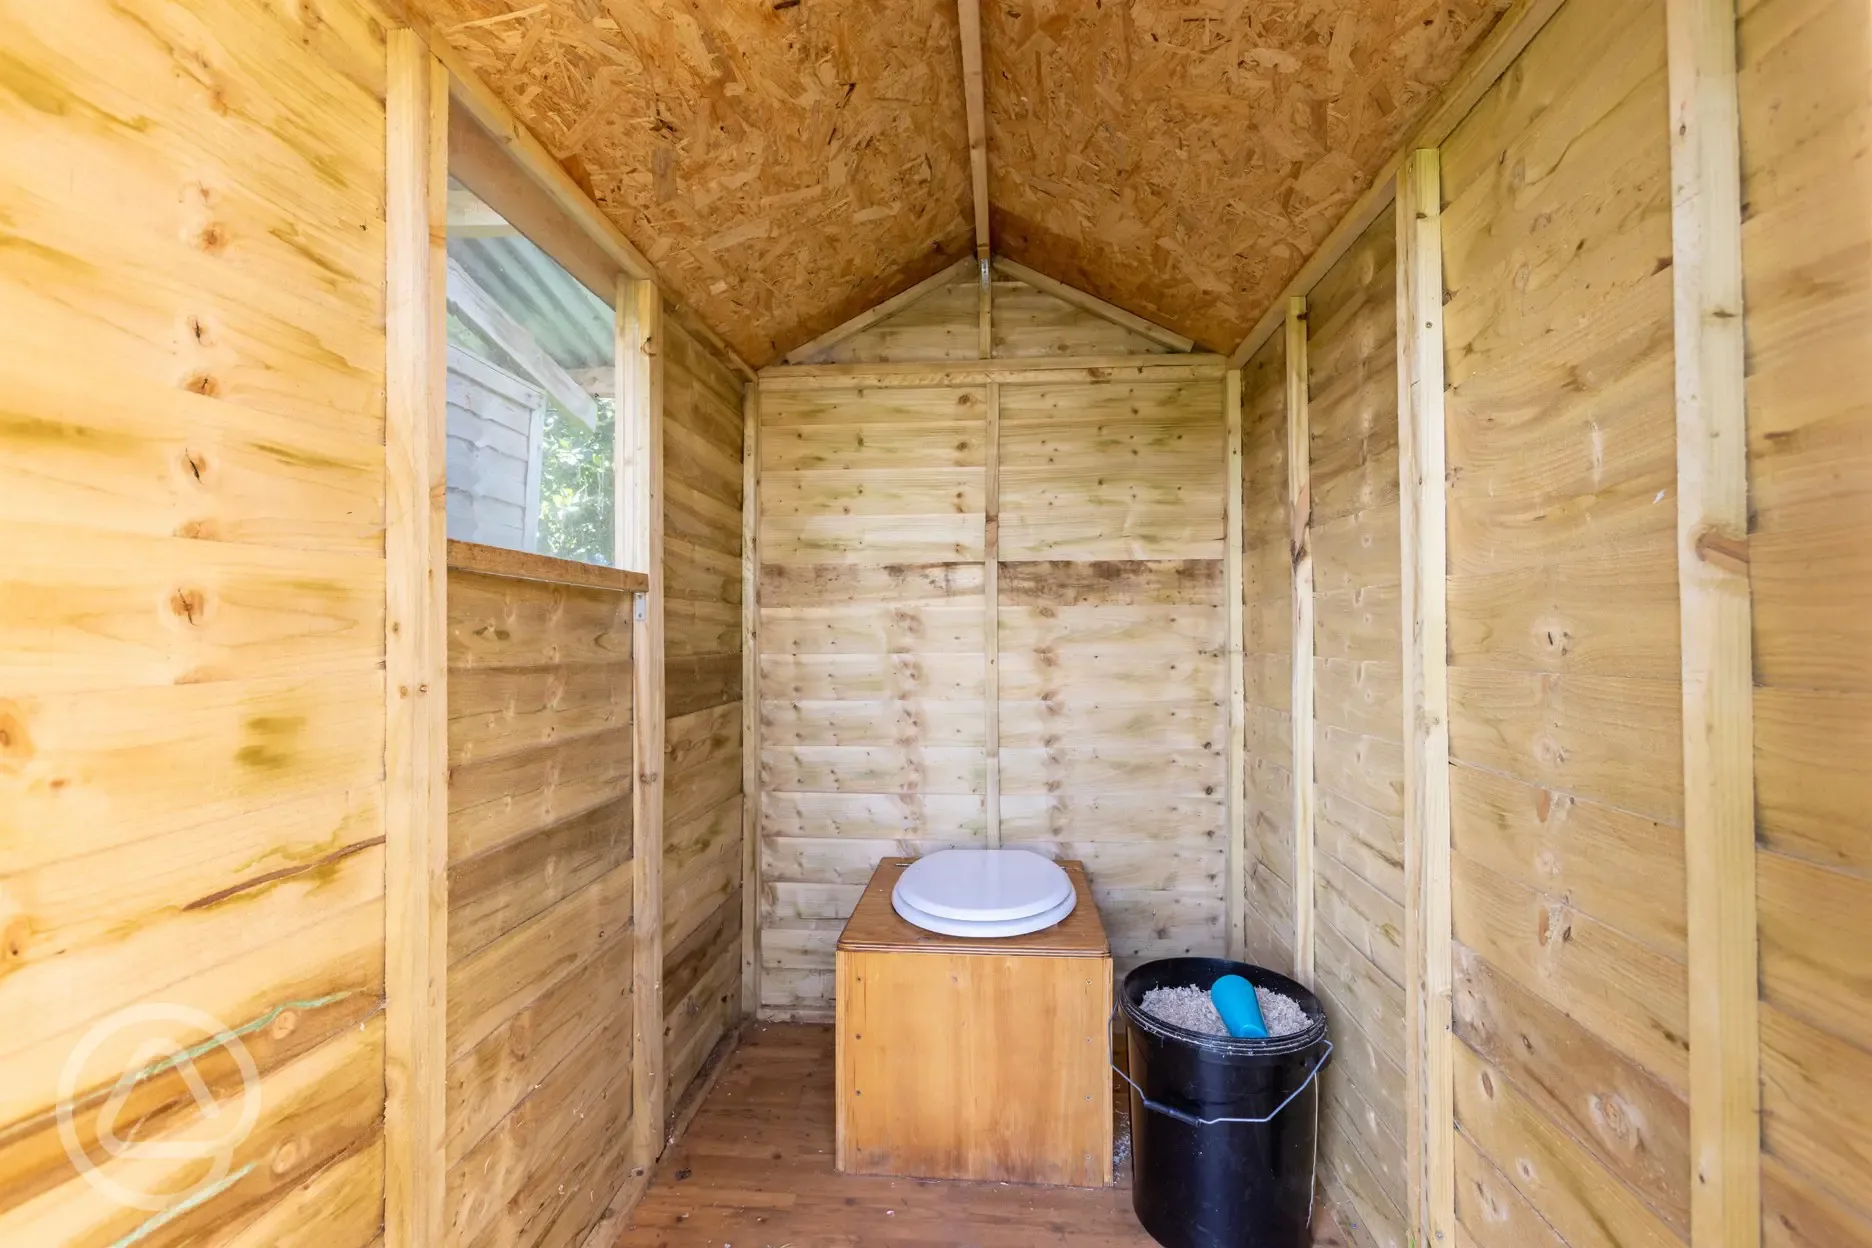 Compost loos